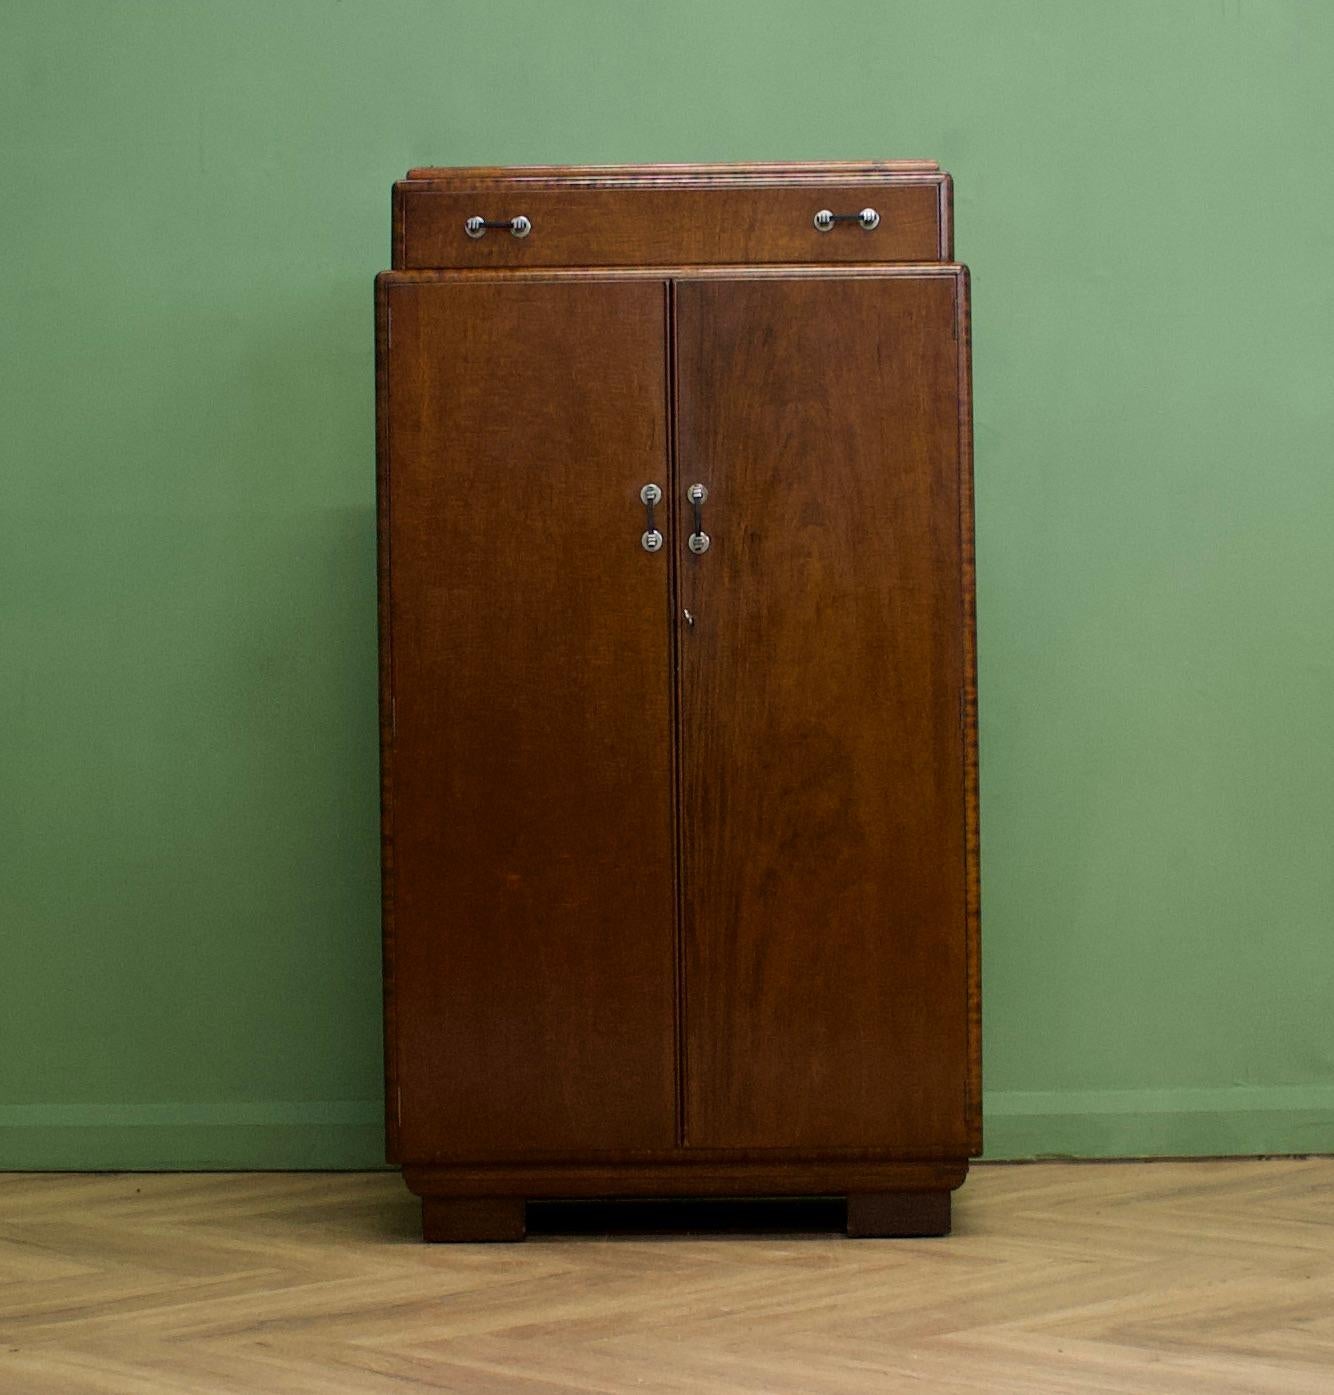 A vintage mahogany Art Deco style compactum / compact wardrobe
Inside is fitted out with a  rail and shelves


 